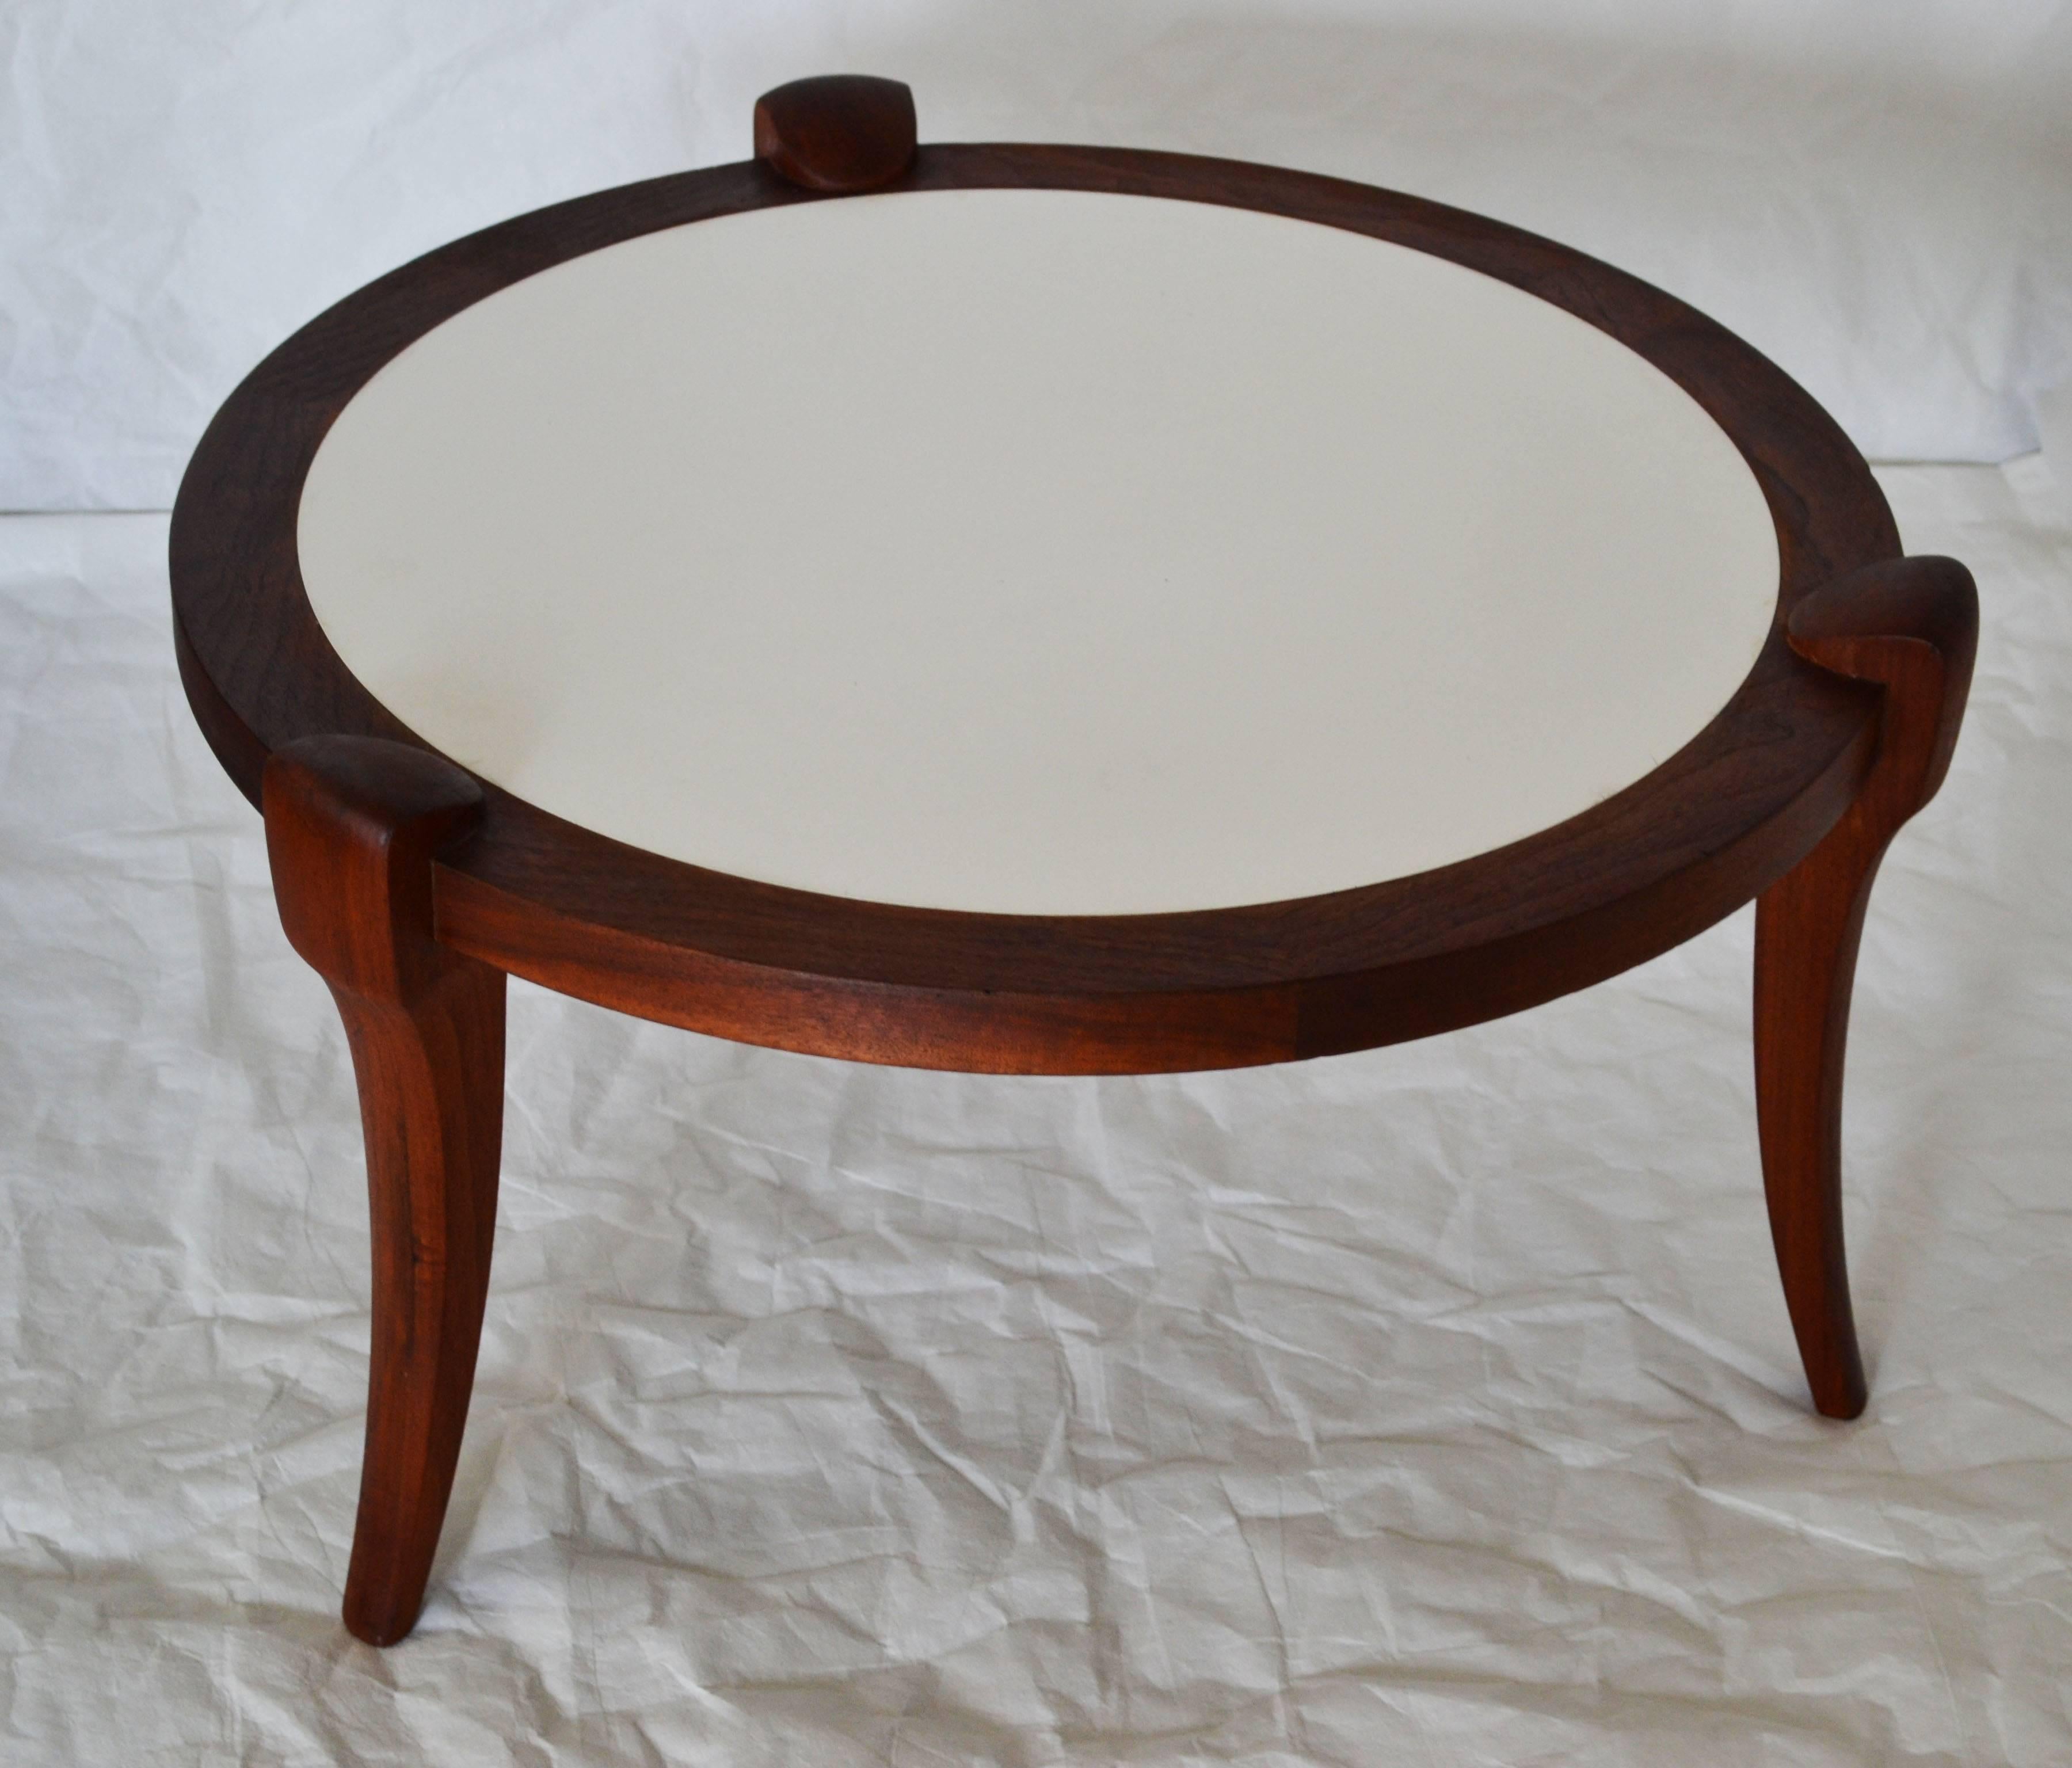 Carved Arne Vodder, Danish 1960s Teak Cocktail Table with White Inset Top For Sale